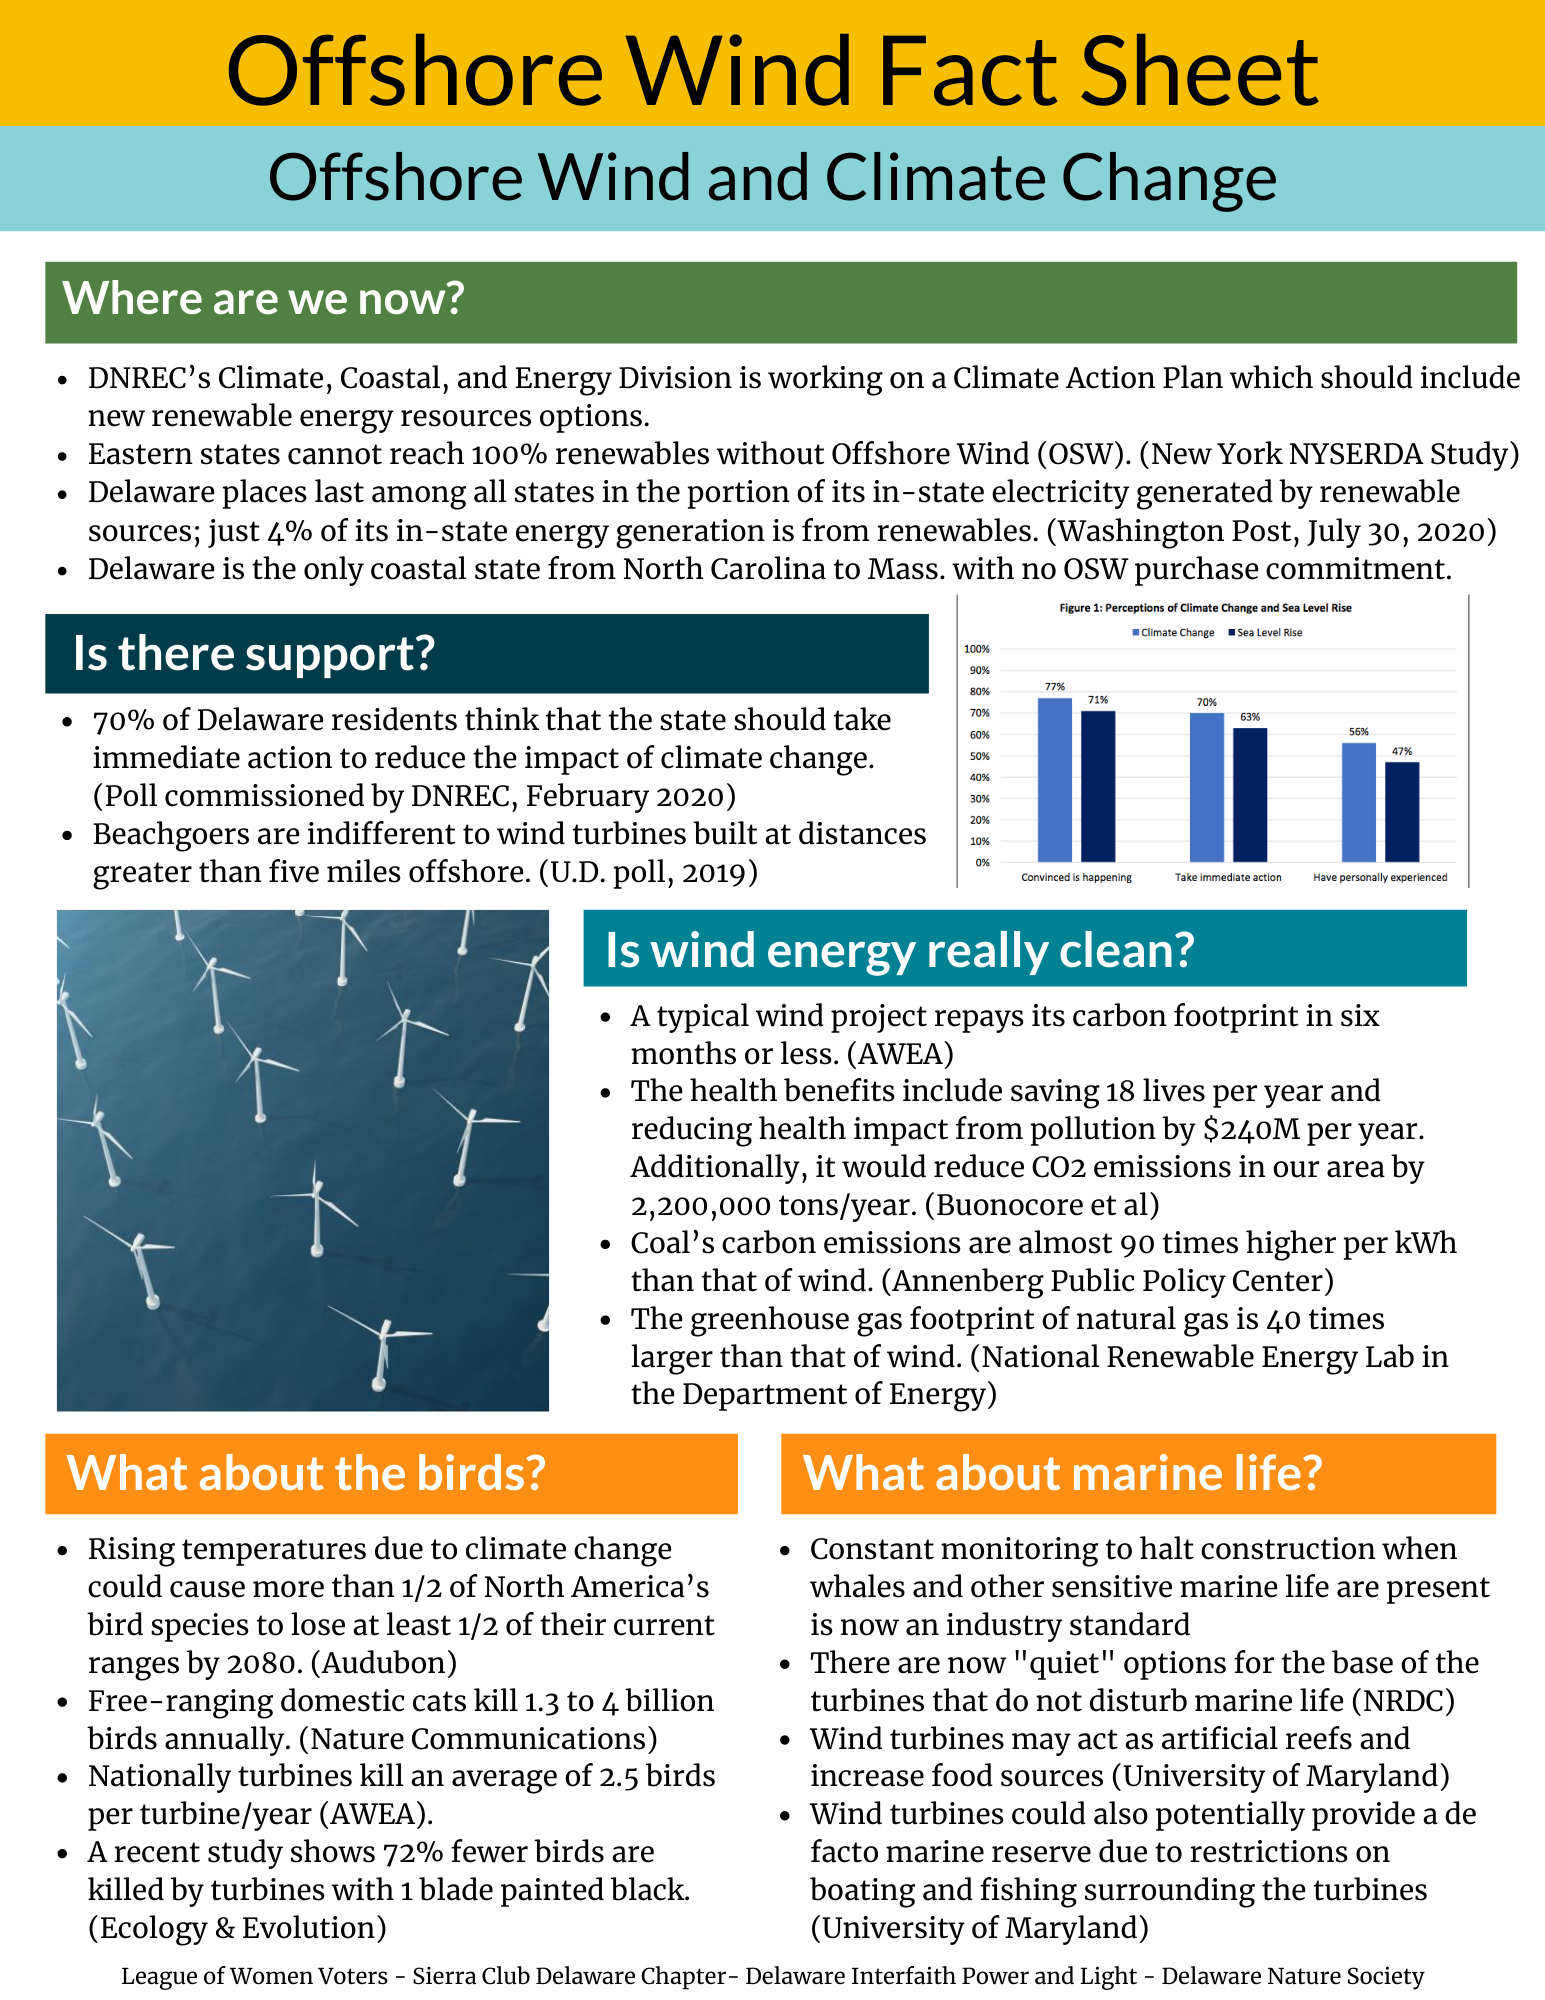 offshore wind and climate change